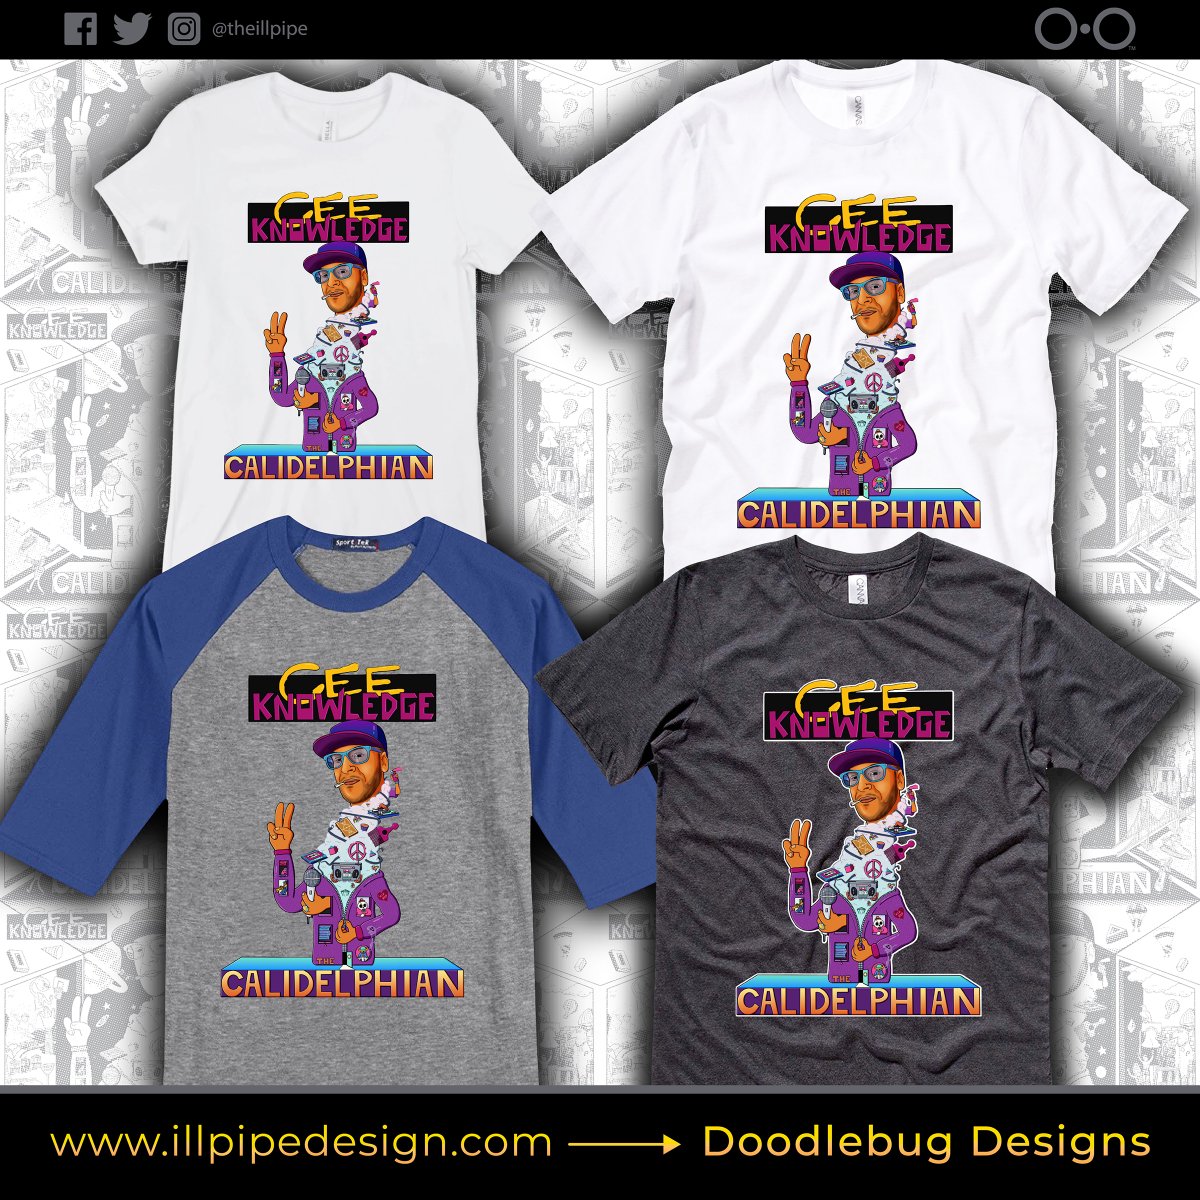 Get your @ceeknowledge tee shirts here, and check out this 'Caledelphia Freestyle Promo!' @MJsHipHopConnex @MalcolmRiddle @mADurgency @digableplanets @OfficialCFO #calidelphian #calidelphia #ceeknowledge #hiphop #oldschoolrap 

soundcloud.com/ceeknowledge/w…

illpipedesign.com/product-catego…